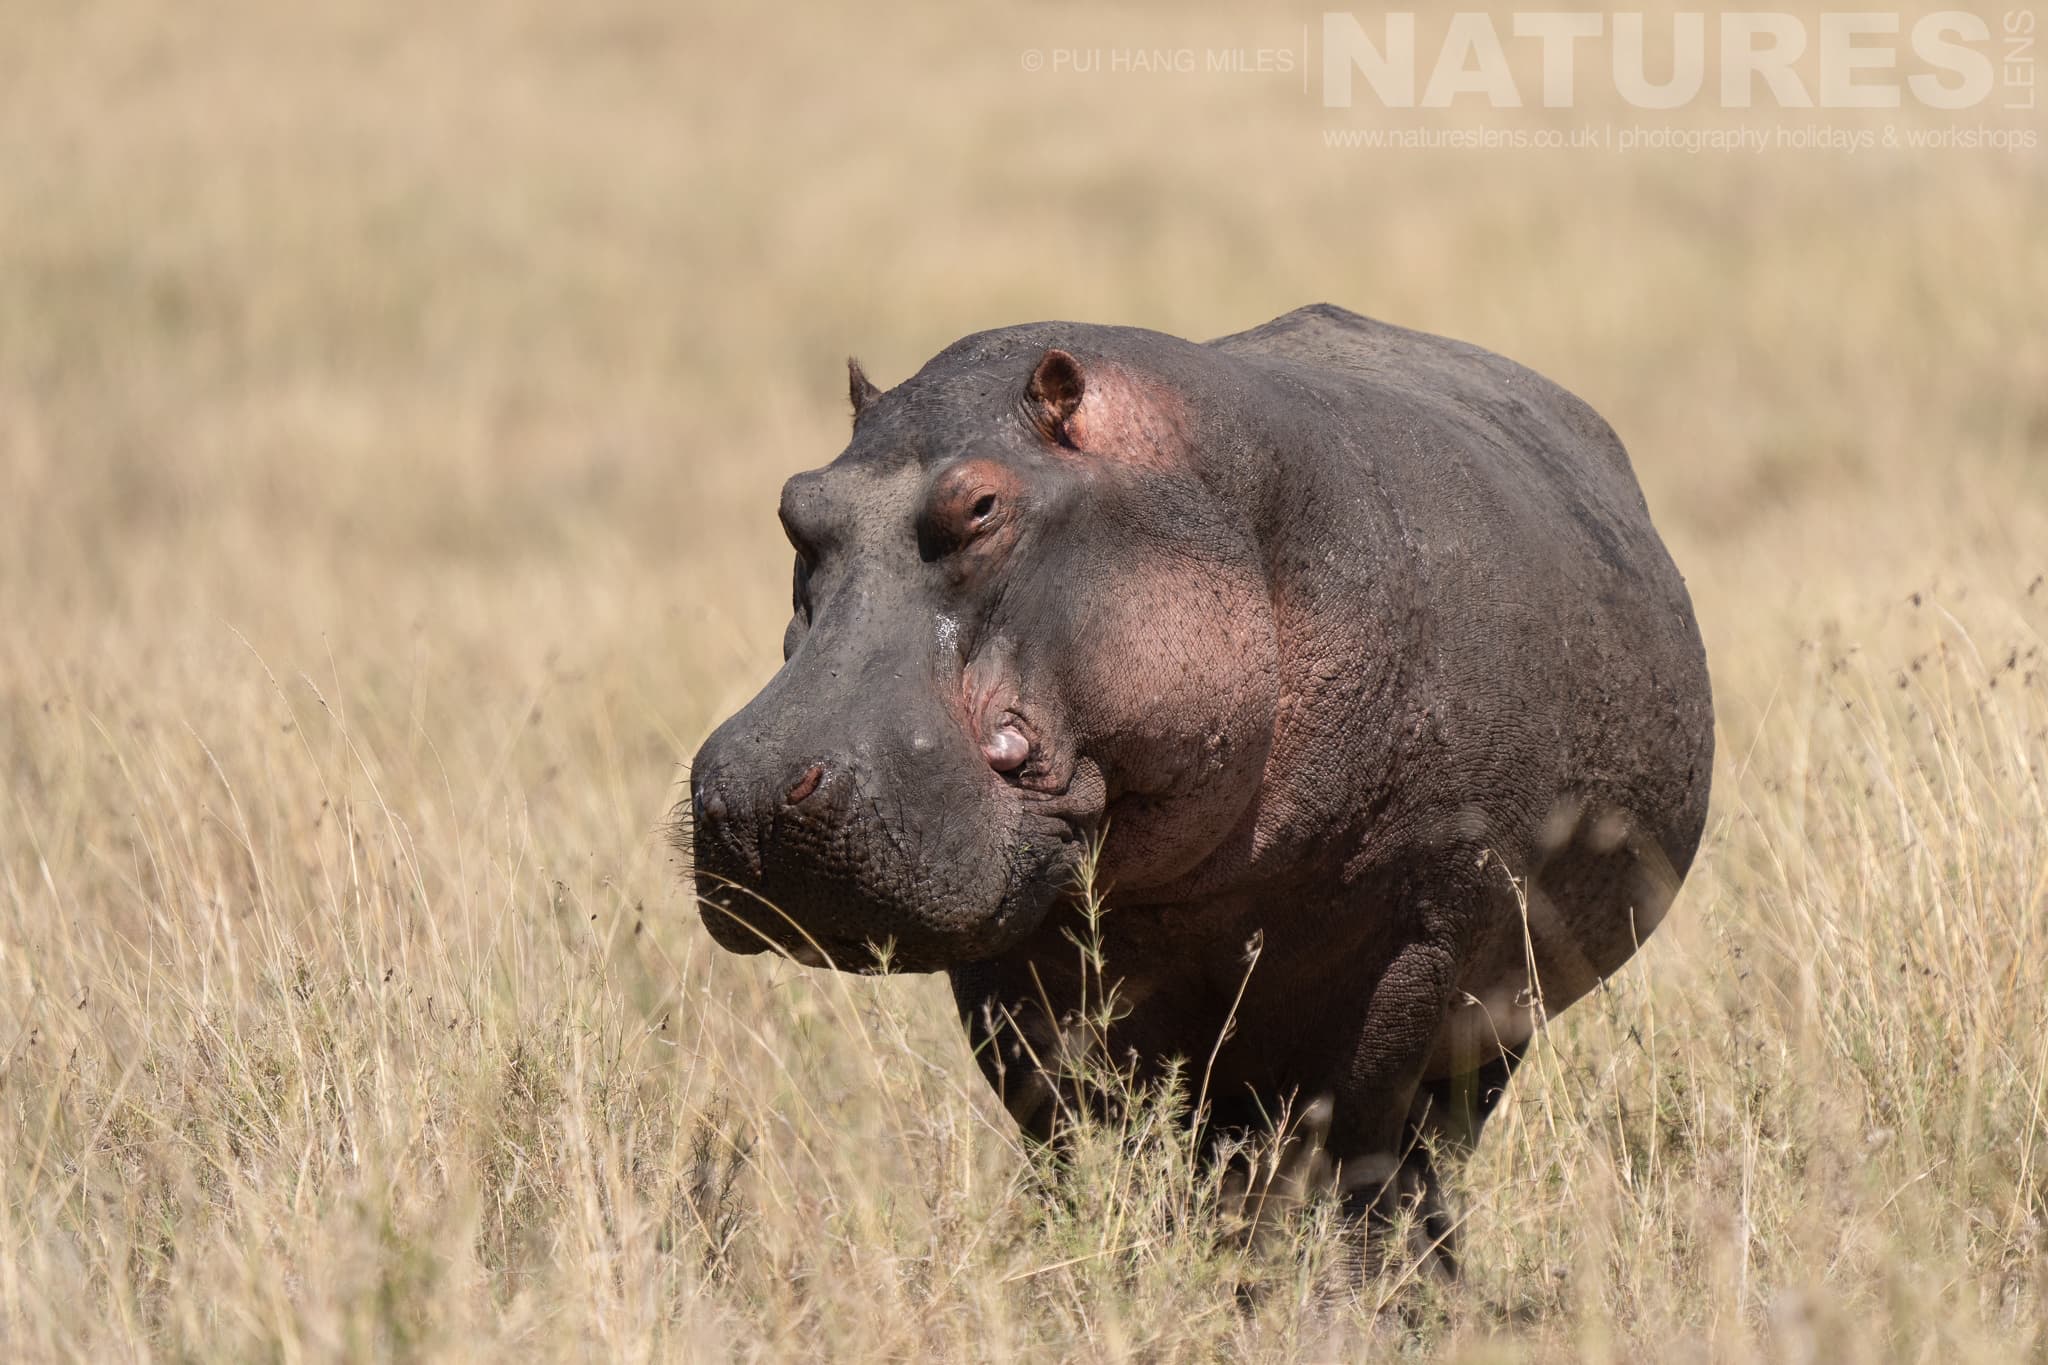 A Hippo Strides Through The Long Grass Photographed During A Natureslens Photography Holiday To Photograph The Wildlife Of The Maasai Mara